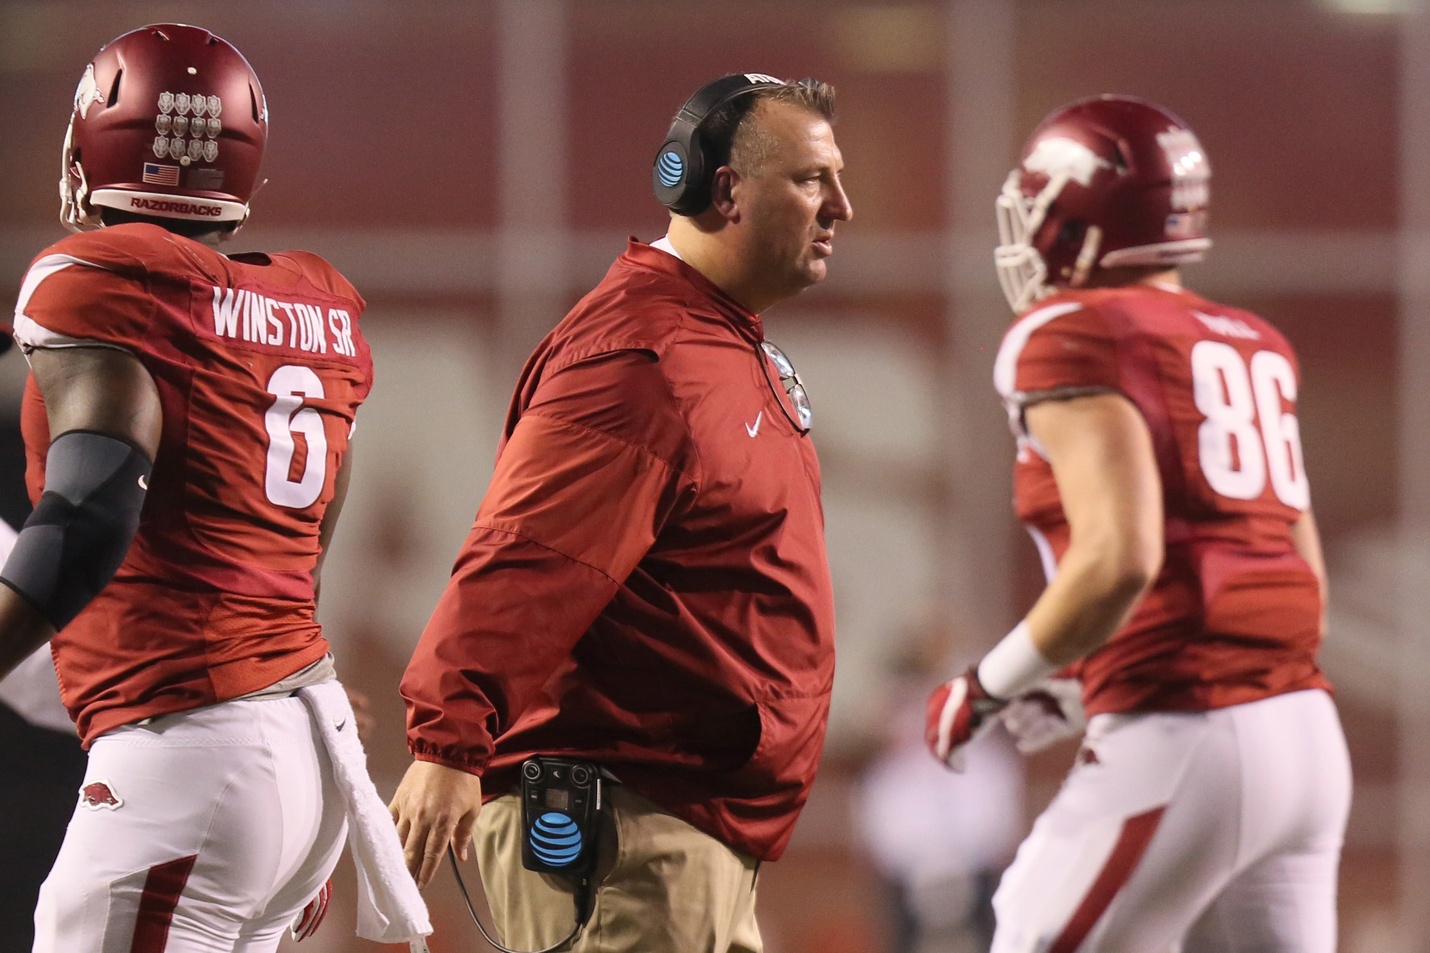 Oct 15, 2016; Fayetteville, AR, USA; Arkansas Razorbacks head coach Bret Bielema congratulates players after a score in the second quarter against the Ole Miss Rebels at Donald W. Reynolds Razorback Stadium. Mandatory Credit: Nelson Chenault-USA TODAY Sports